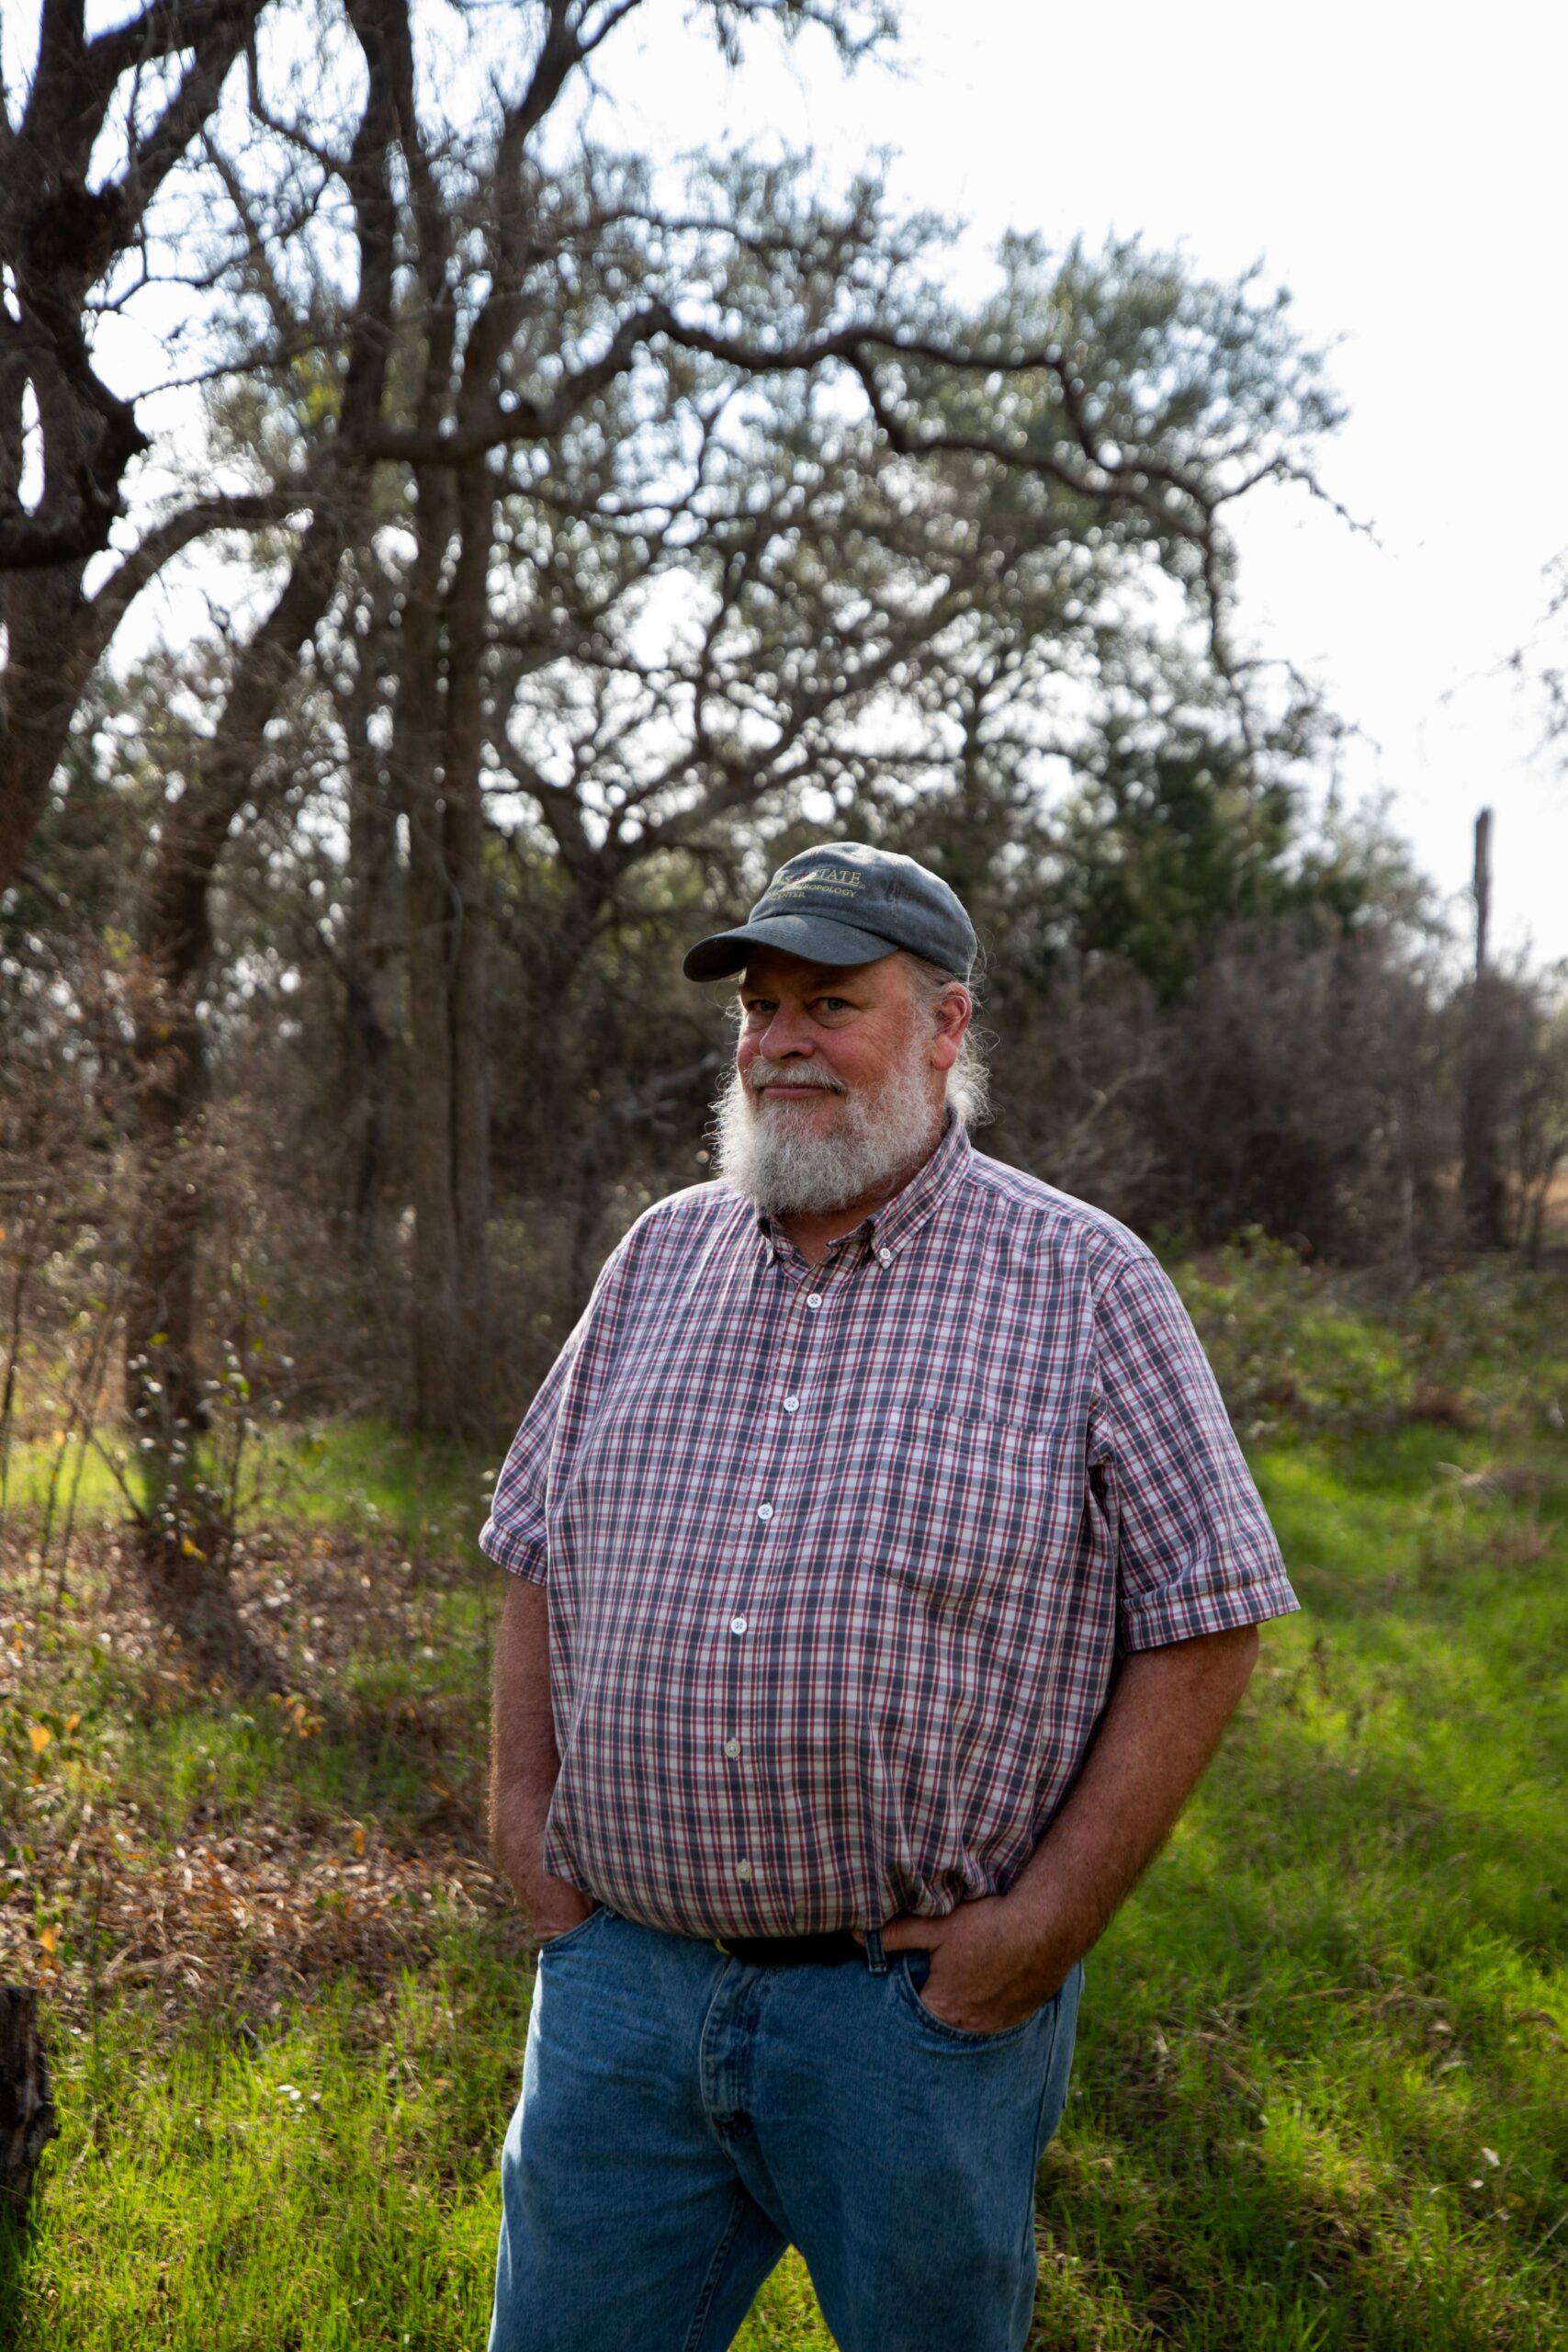 Bare oak trees crowd a small meadow where Forensic Anthropology Center Director Daniel Wescott says he would like to be placed on the body ranch as part of a study after he dies. Westcott is an older white man with a silver beard, wearing a baseball cap, jeans and a red and white flannel button-down.